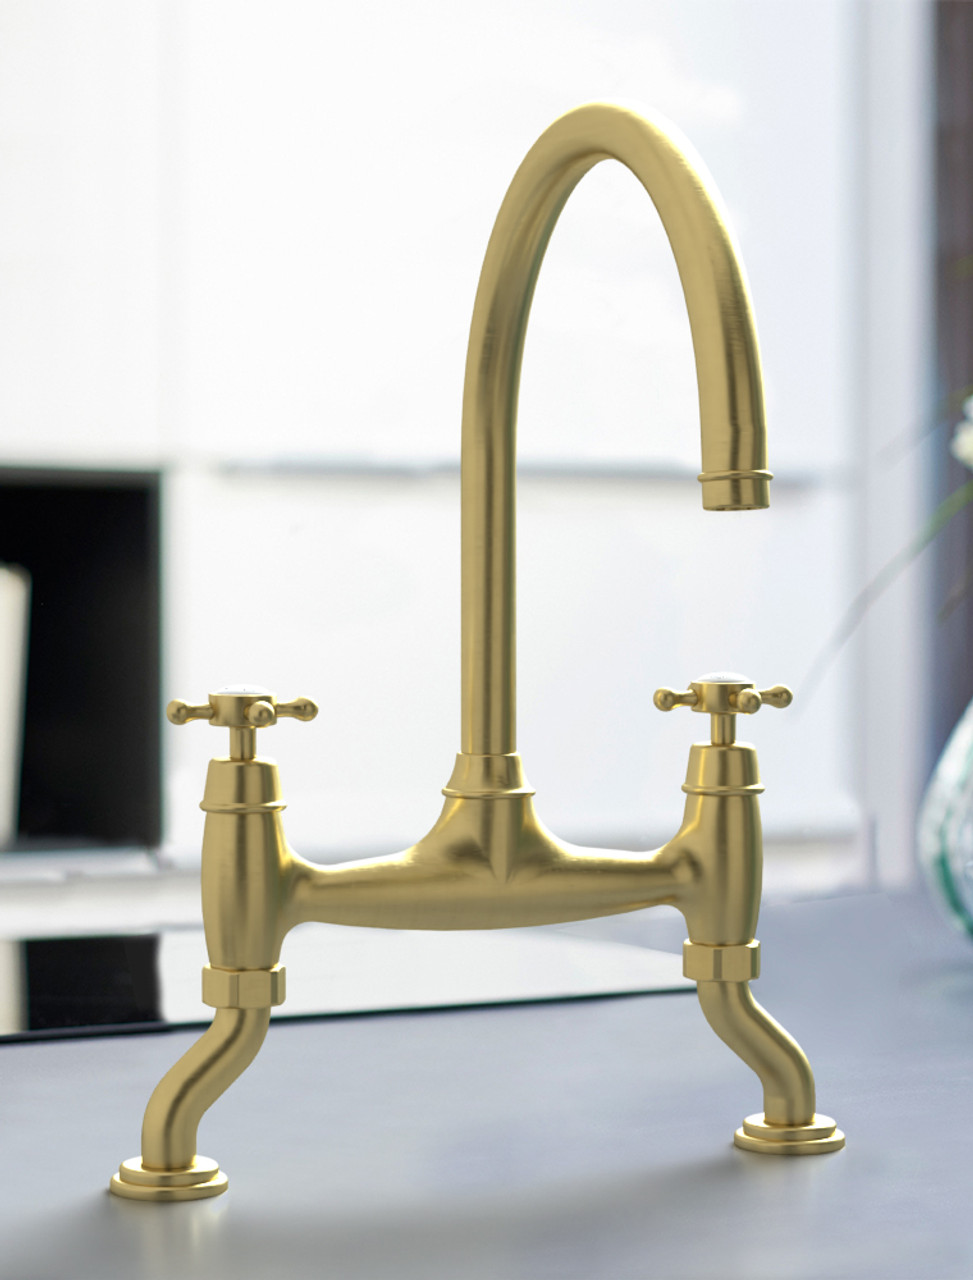 Sherborne Old English Brass Twin Lever Bridge Tap with Crosshead Handles